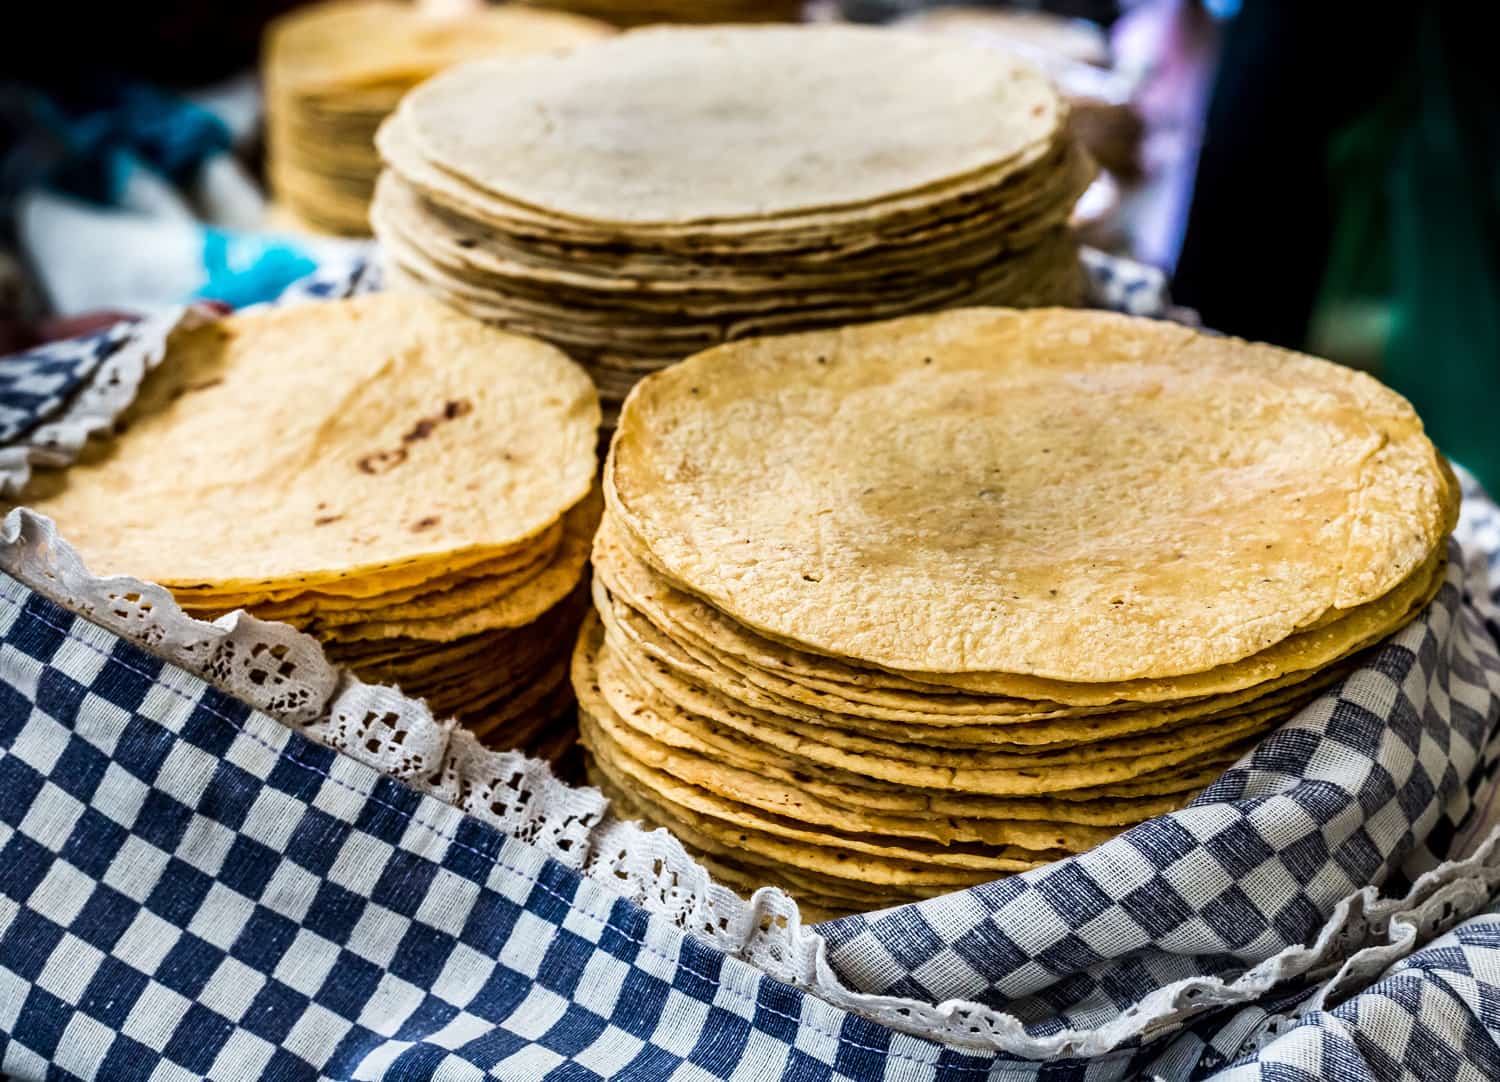 Handmade Tortillas on the market for sale